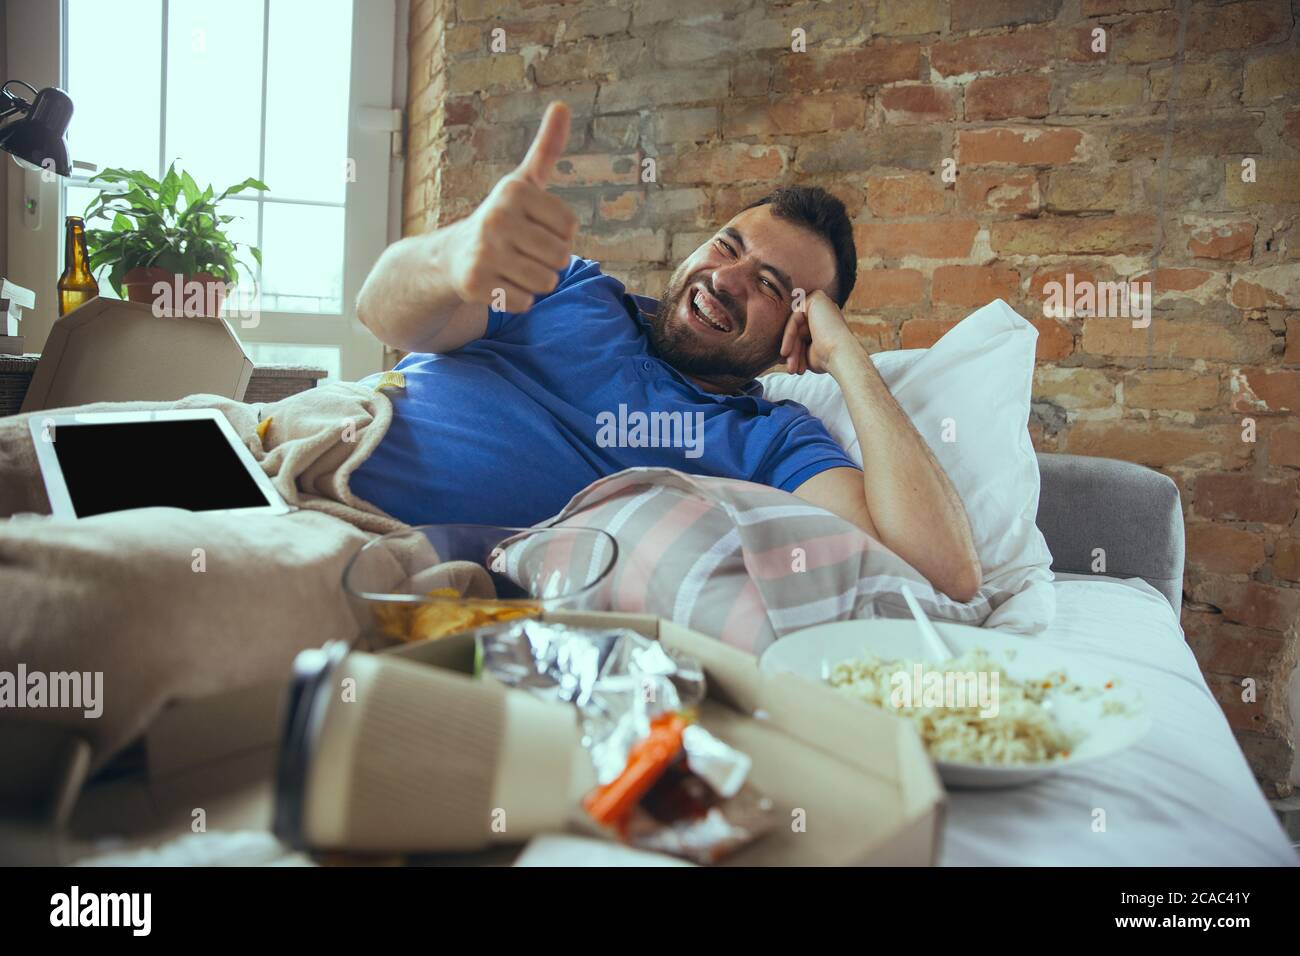 Thumb up, laughting. Lazy caucasian man living in his bed surrounded with messy. No need to go out to be happy. Using gadgets, watching movie and series, social media, looks emotional. Home lifestyle. Stock Photo